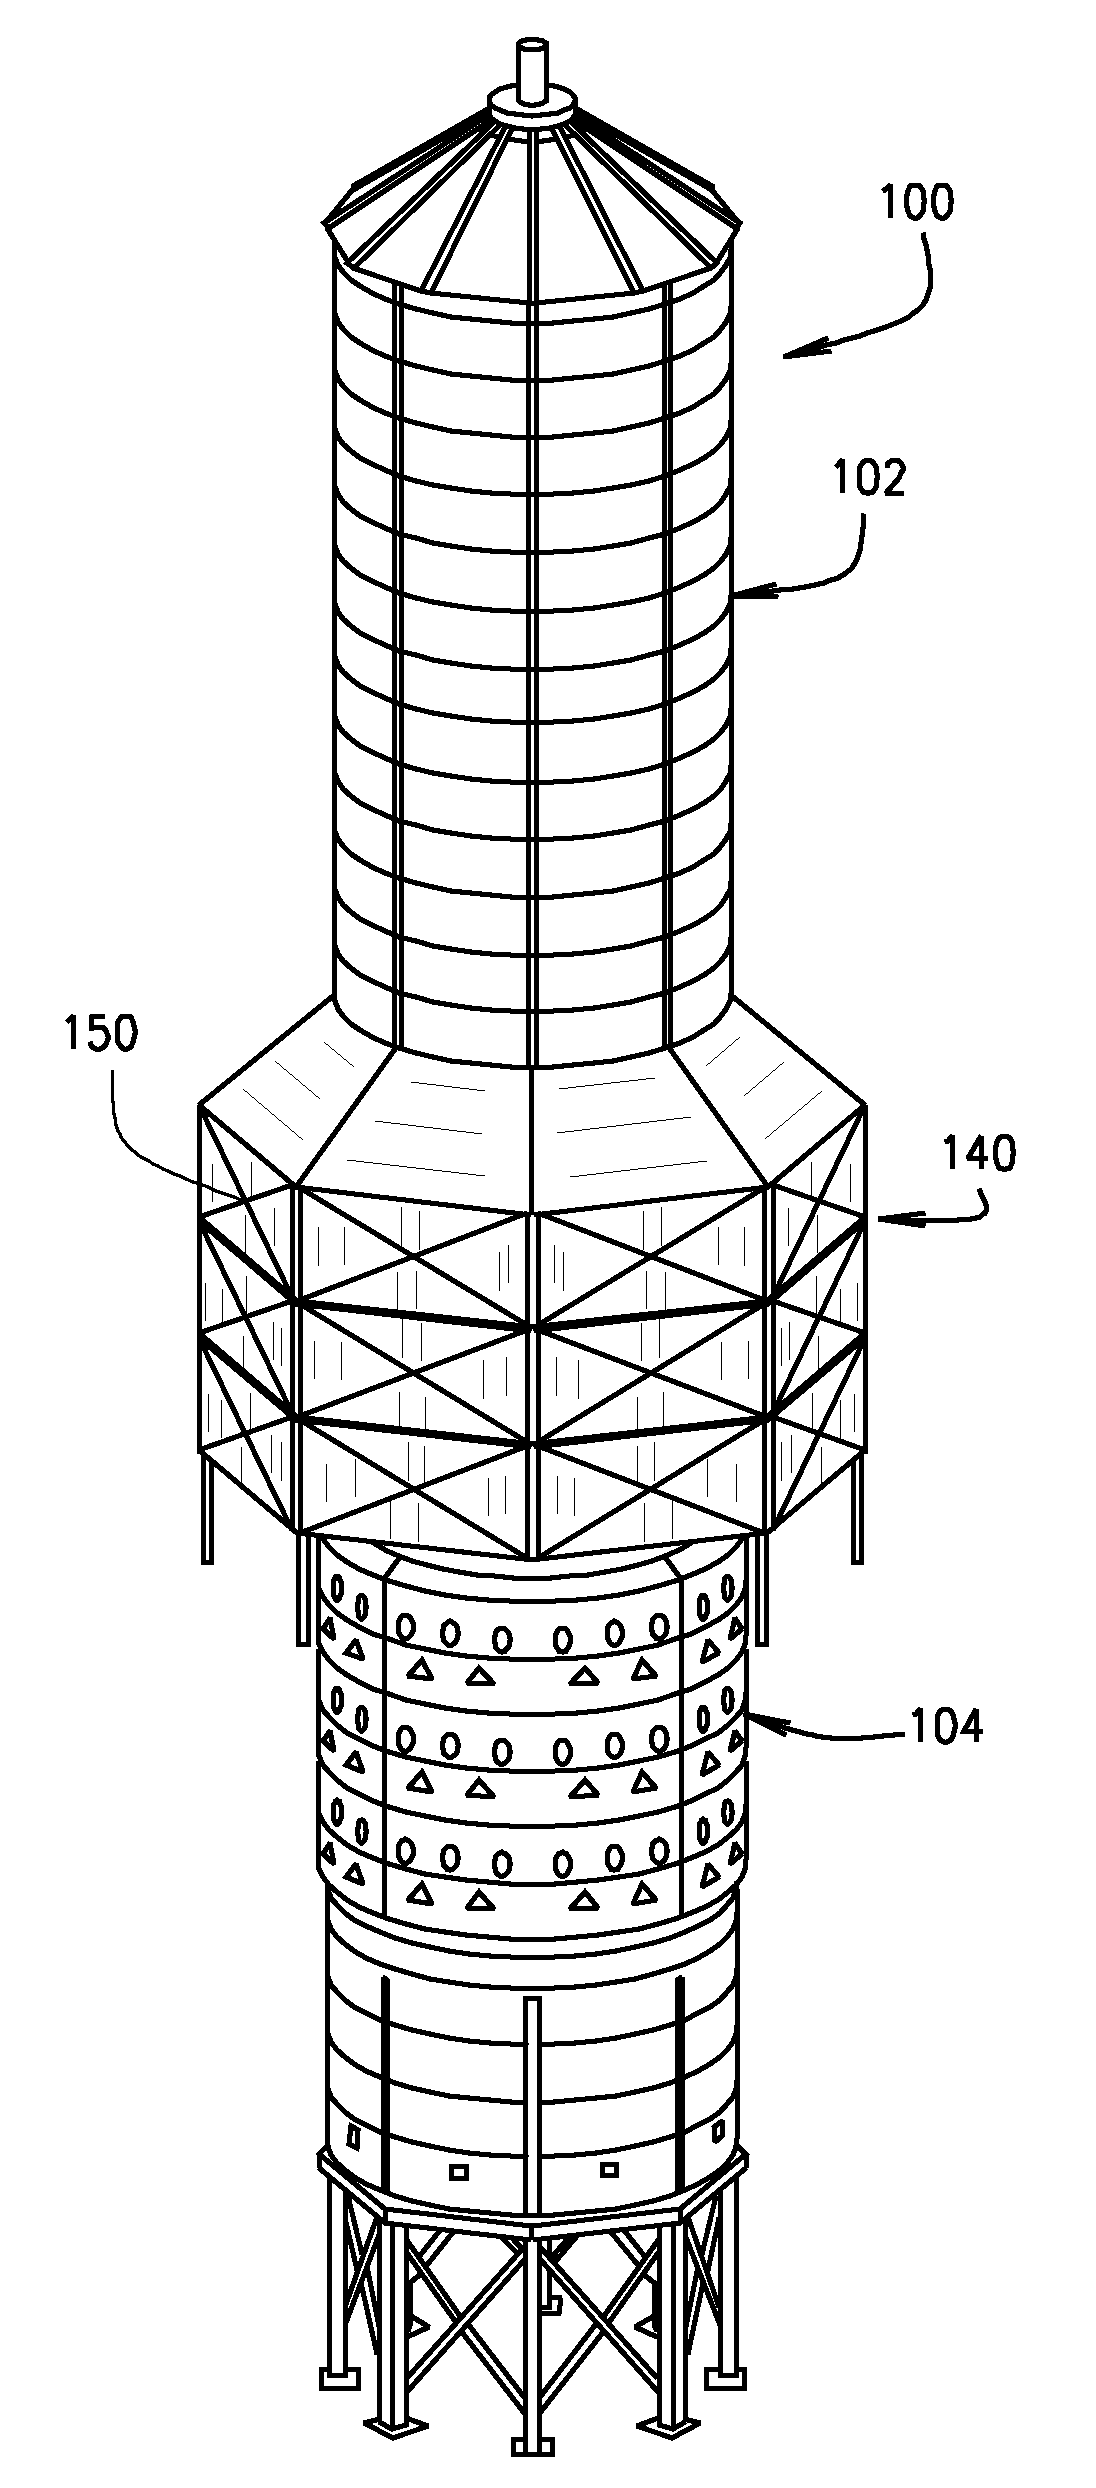 Tower grain dryer with improved heat reclamation and counter-flow cooling section